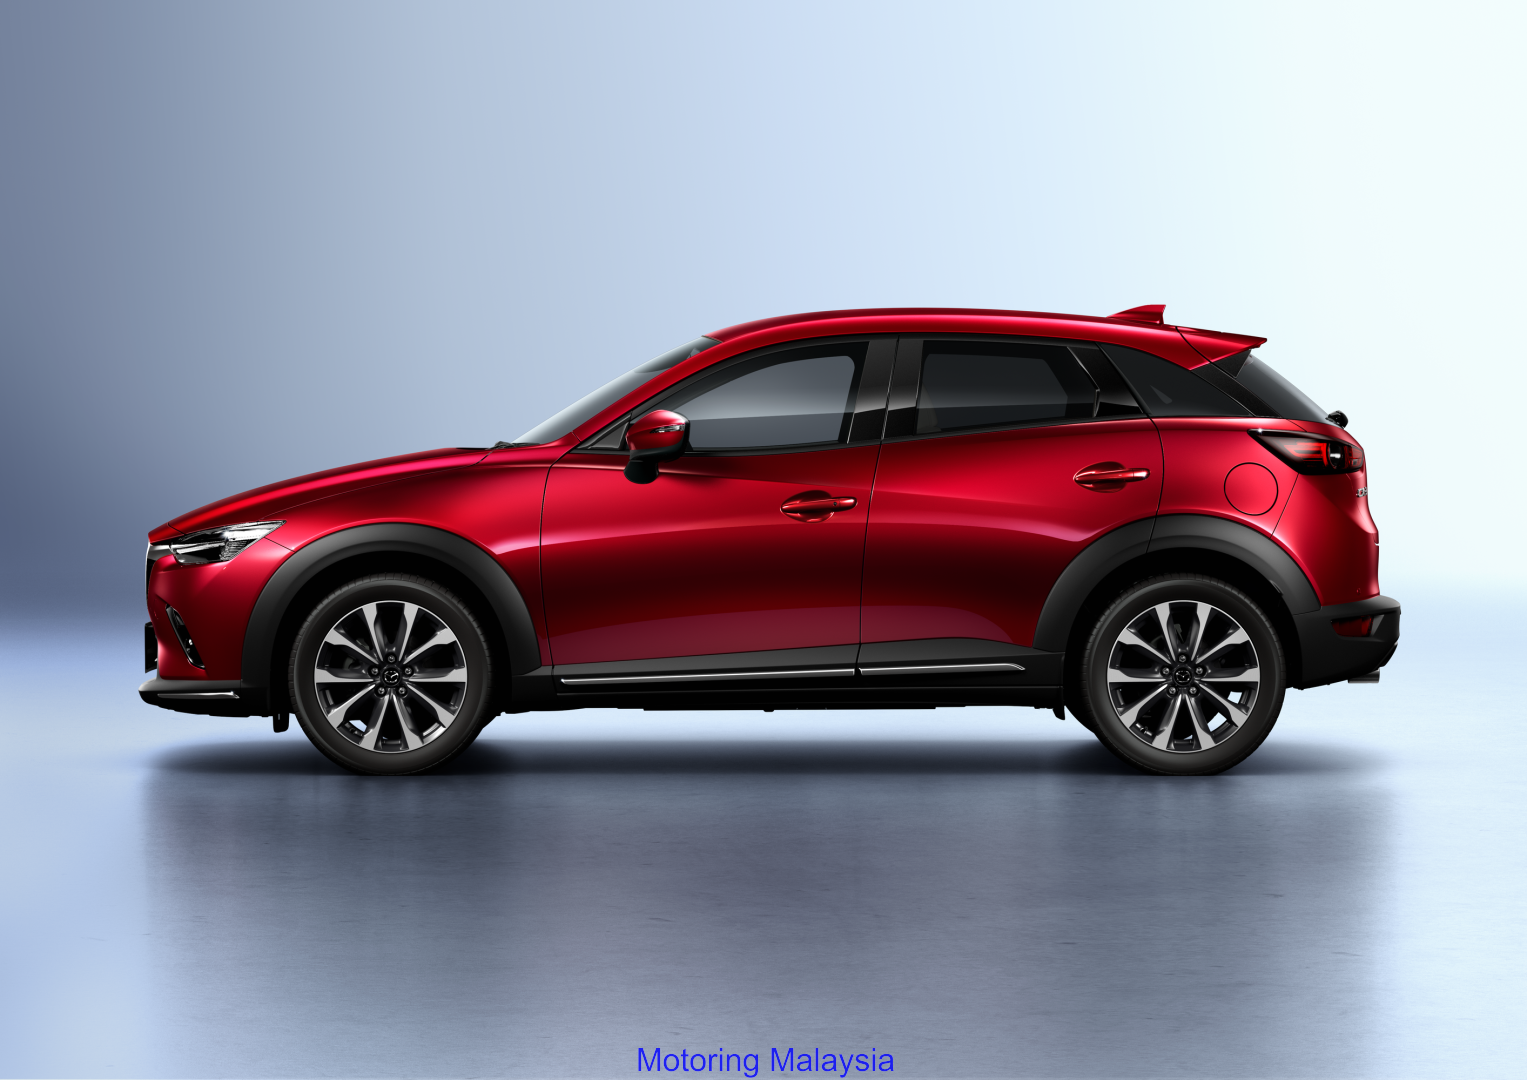 Motoring-Malaysia: Bermaz Launches the Refreshed 2018 Mazda CX-3 in Malaysia